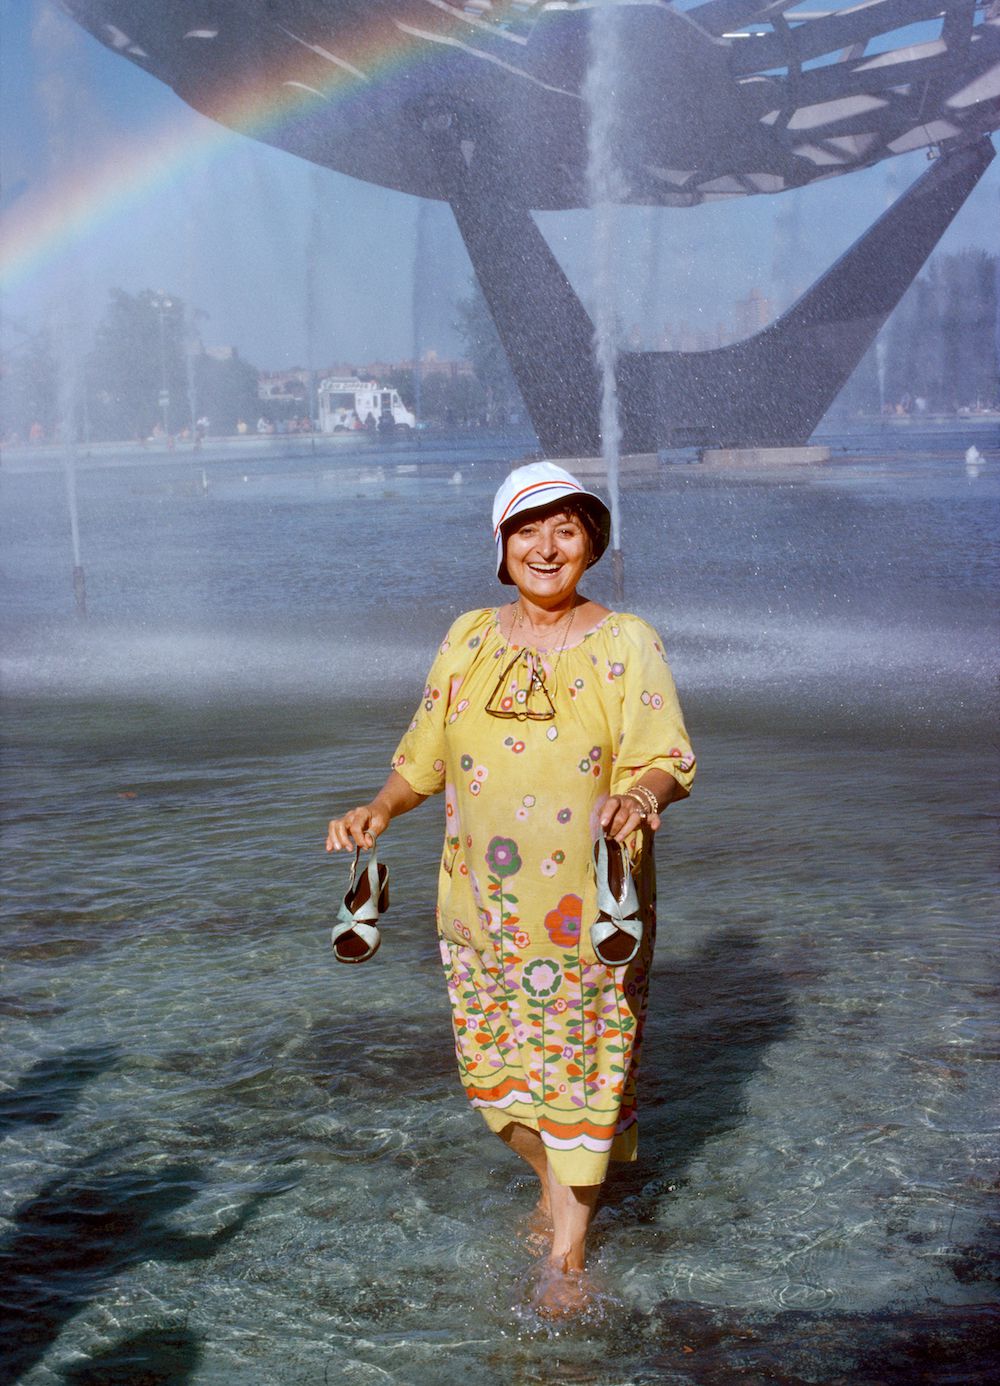 Gary Settle, Woman at Unisphere, Flushing Meadows Corona Park, Queens, 1978, NYC Parks Photo Archive